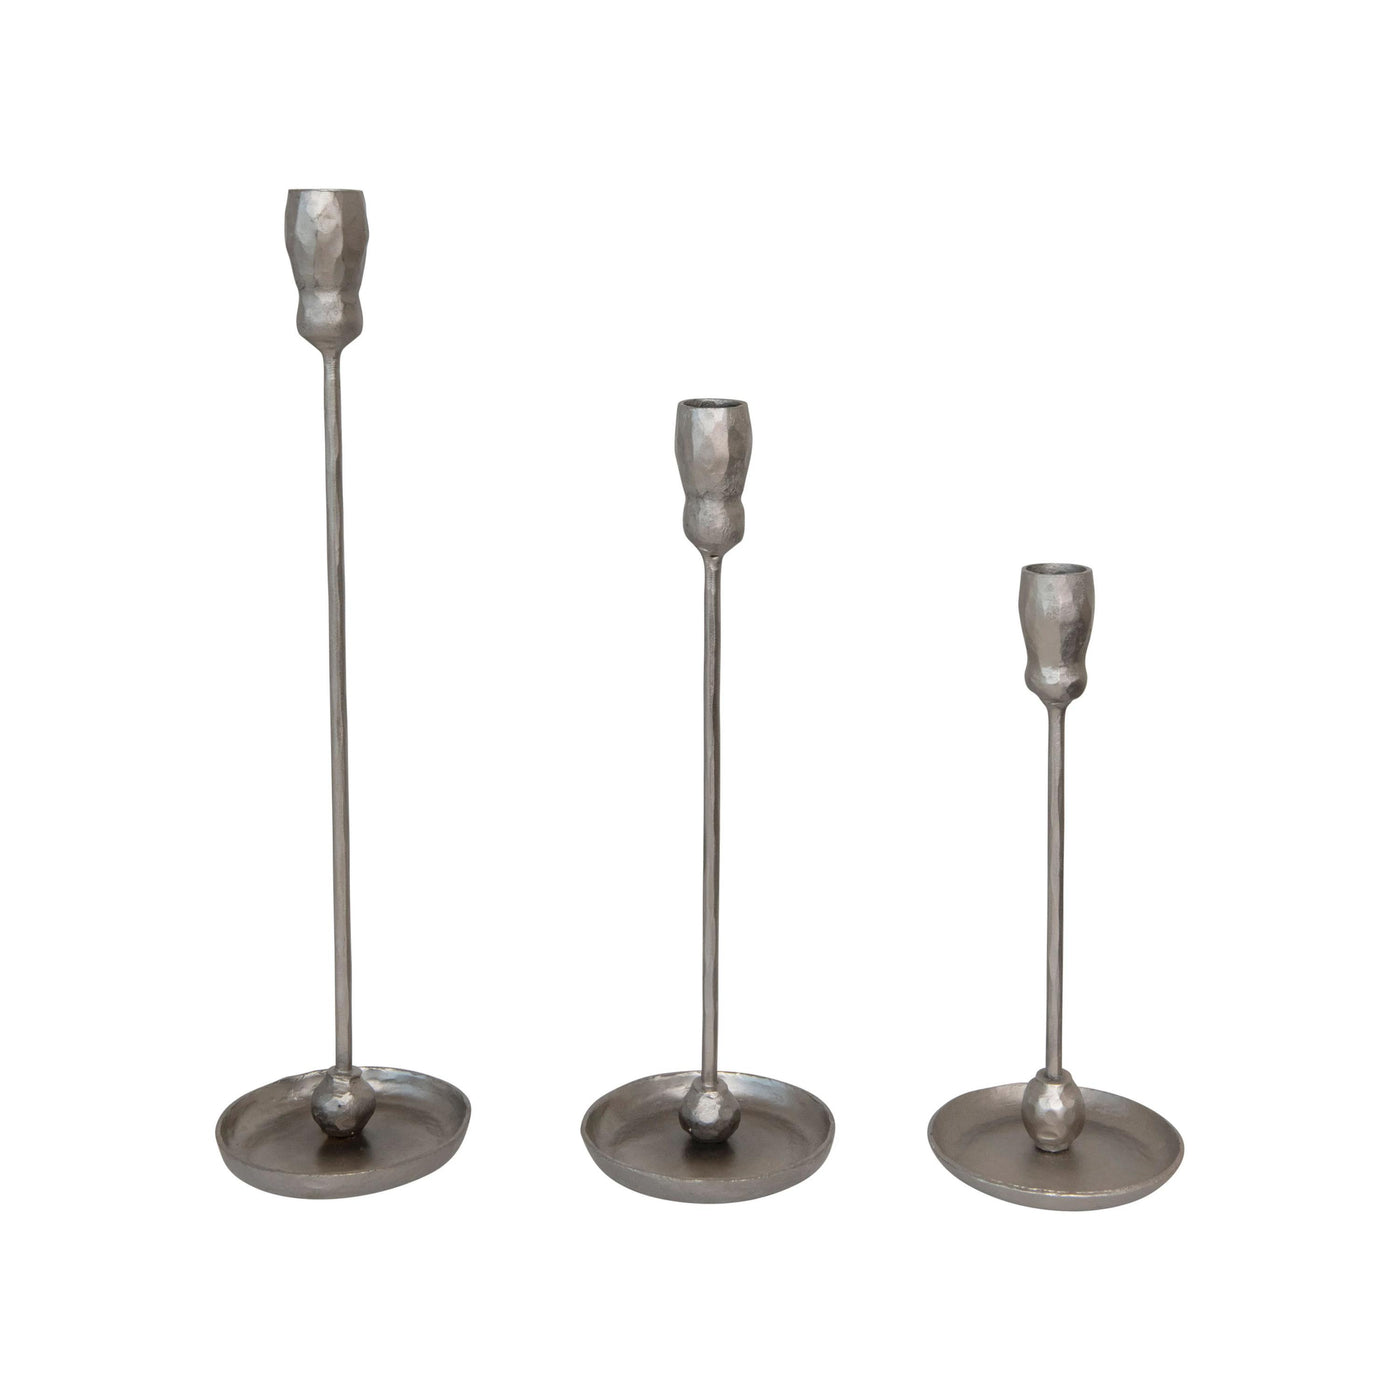 Set of 3 Hand Forged Iron Taper Candle Holders